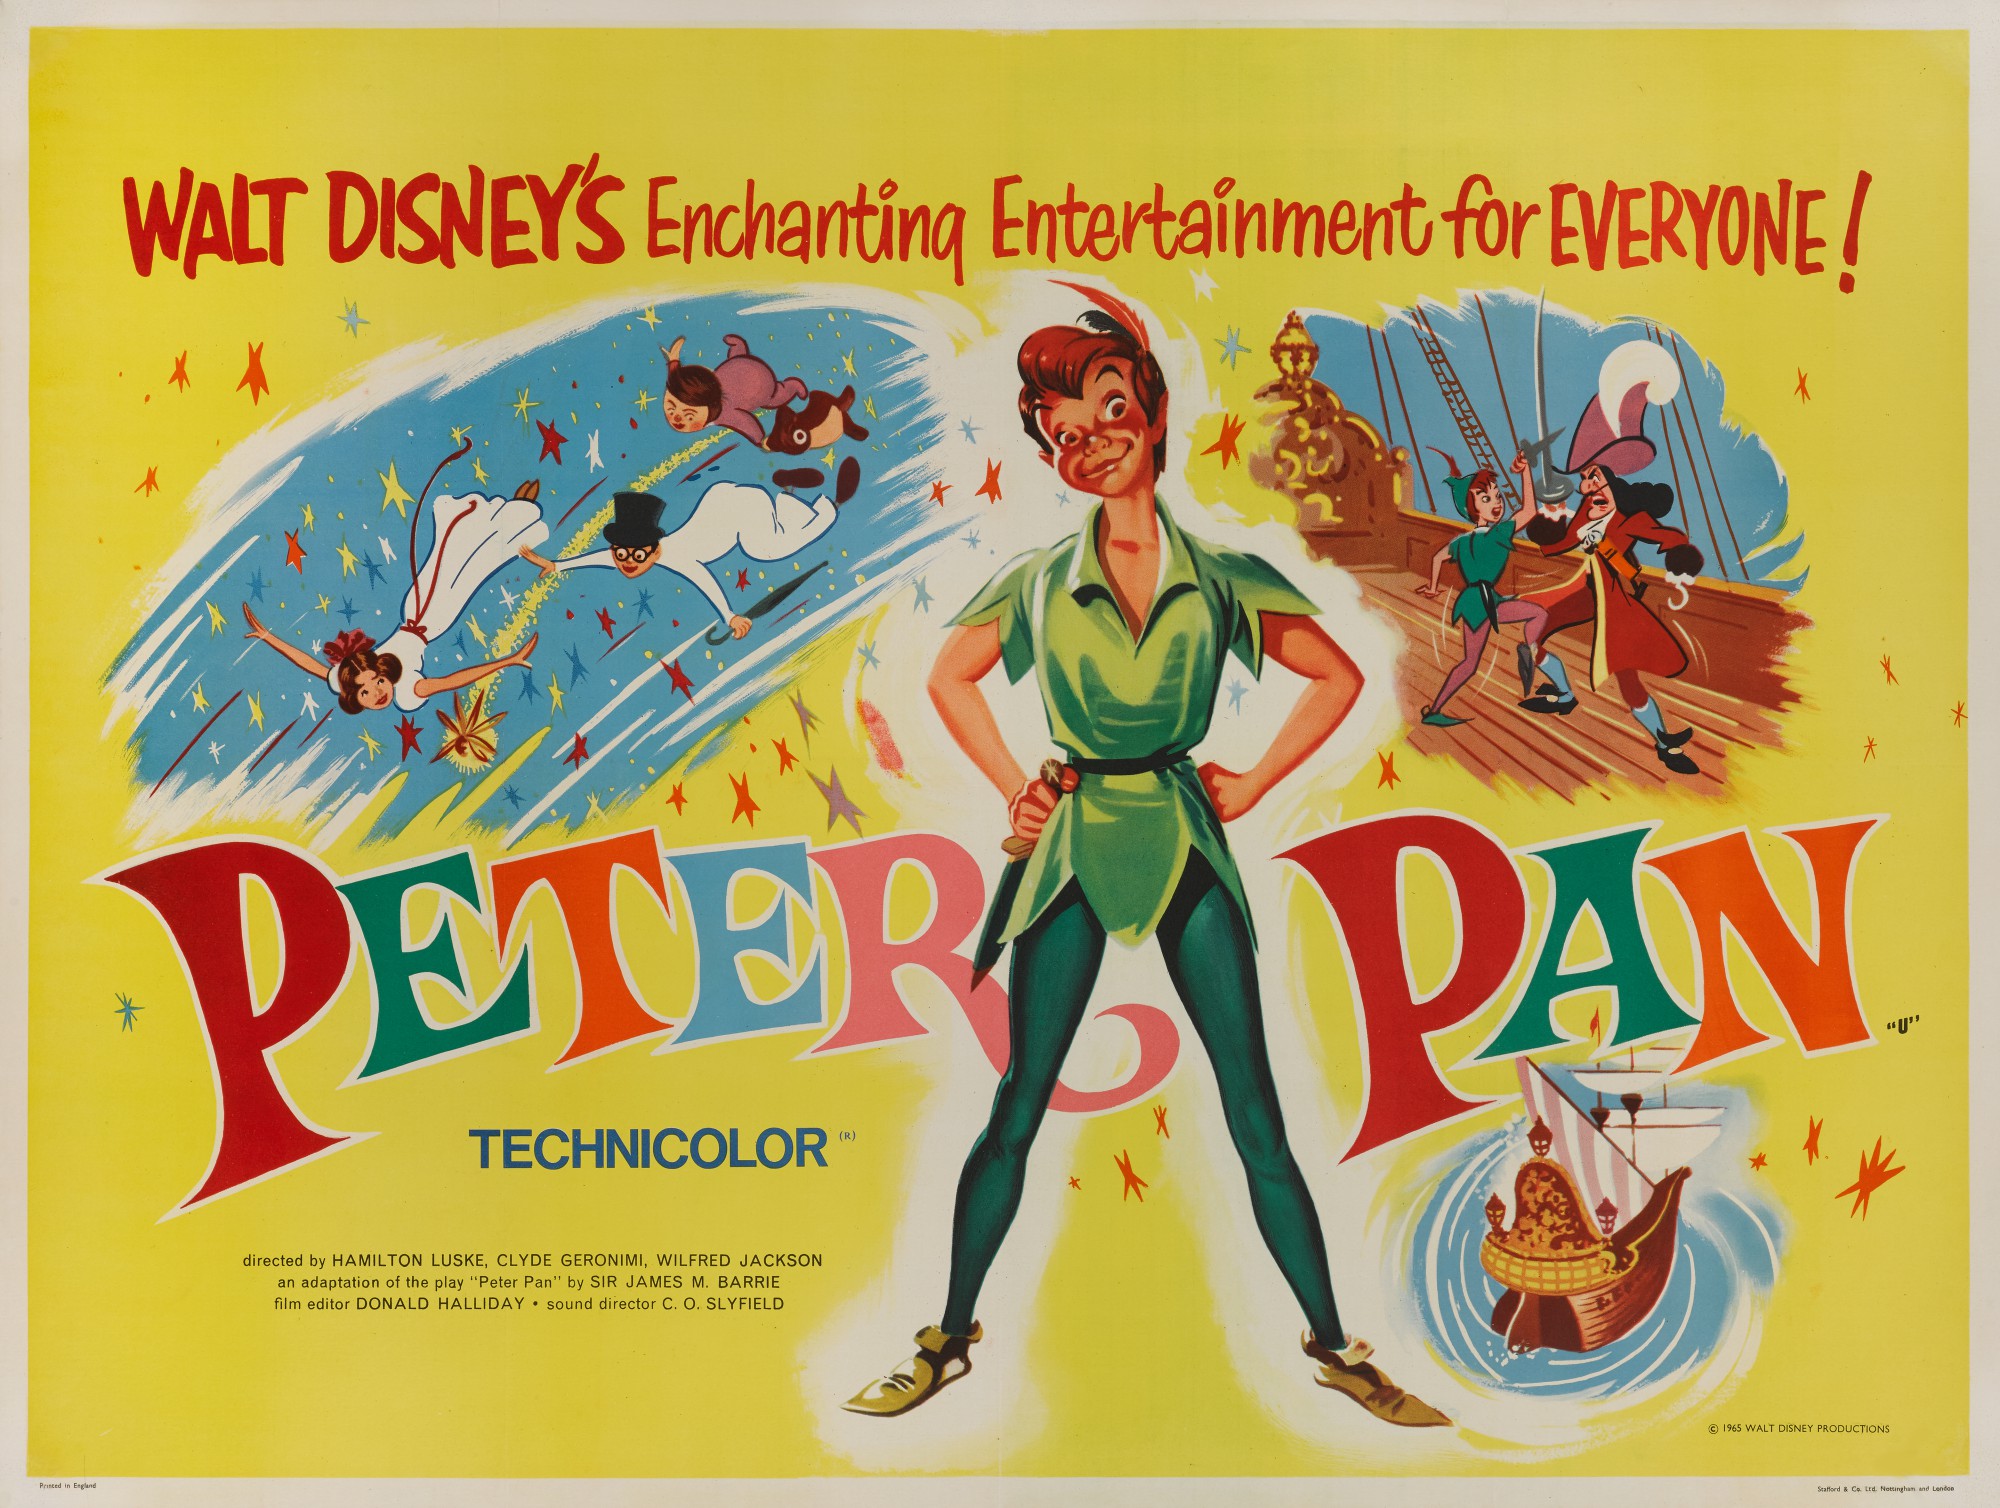 Peter Pan (1953) Review – The Most Disney Film Ever?